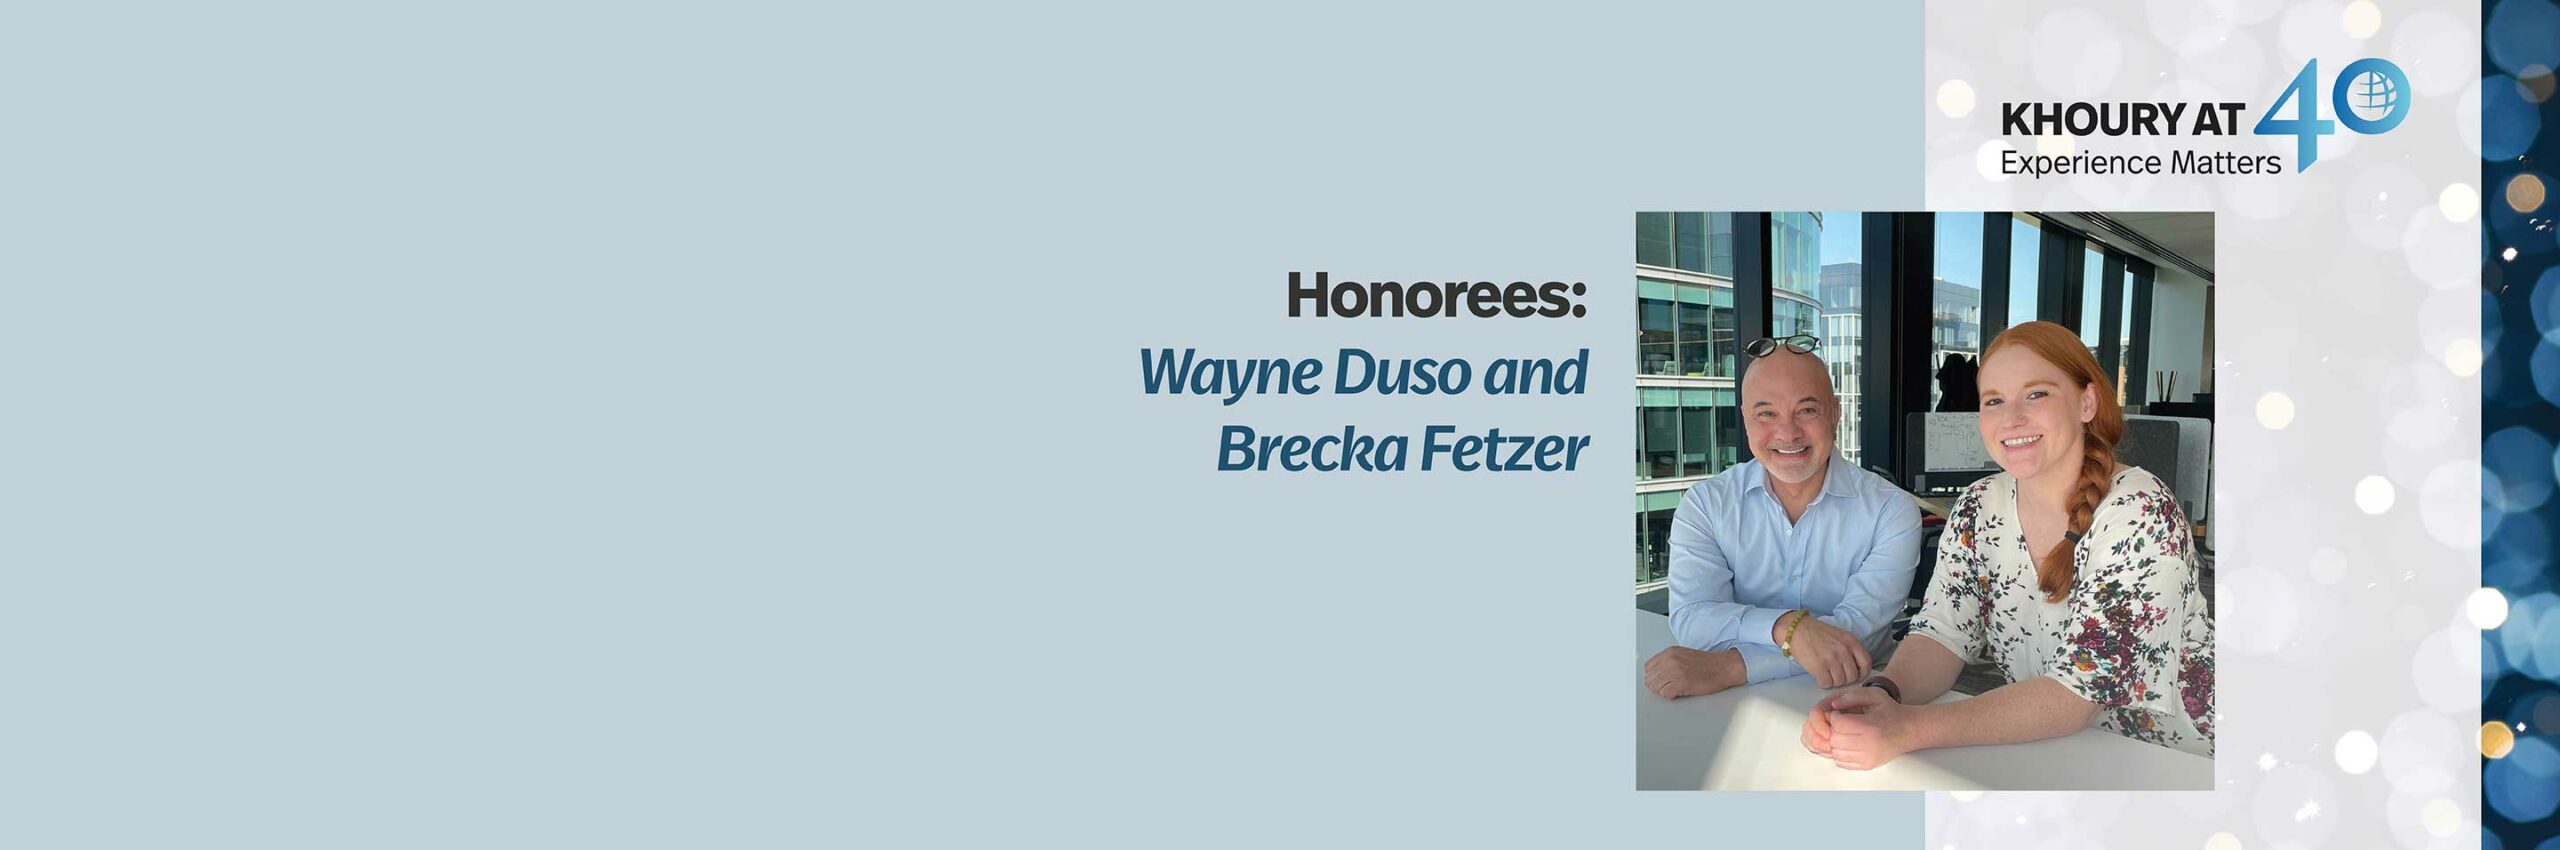 40 for 40 Honorees: Wayne Duso and Brecka Fetzer